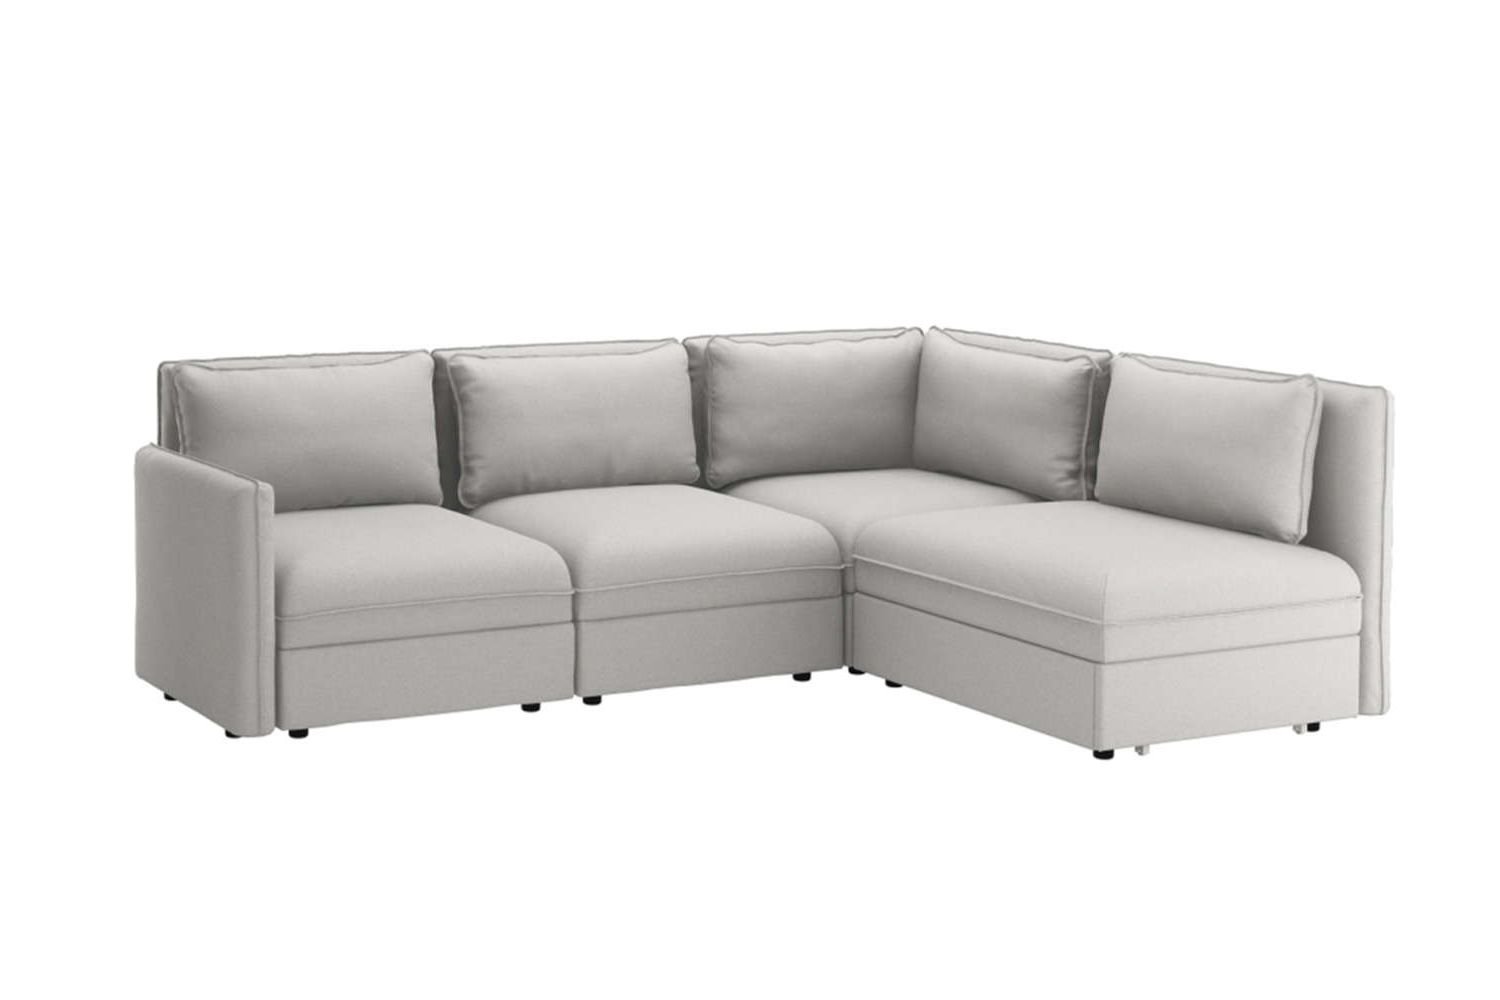 8 Favorites: Surprisingly Attractive Sofas With Storage Regarding Sofa Sectionals With Storage (Gallery 14 of 20)